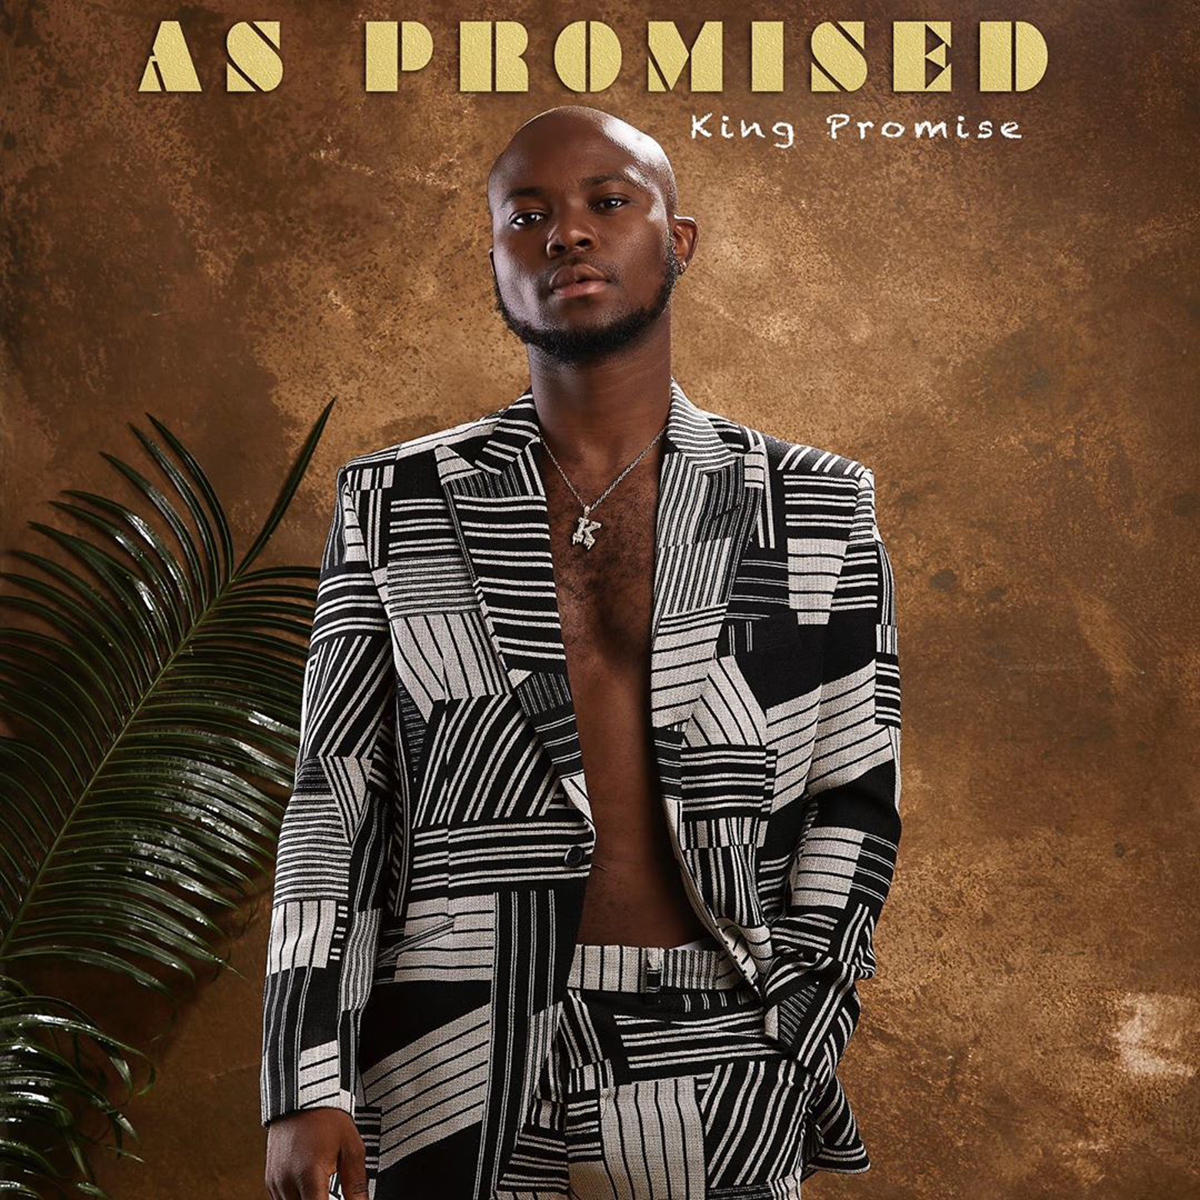 Album Review: As Promised by King Promise